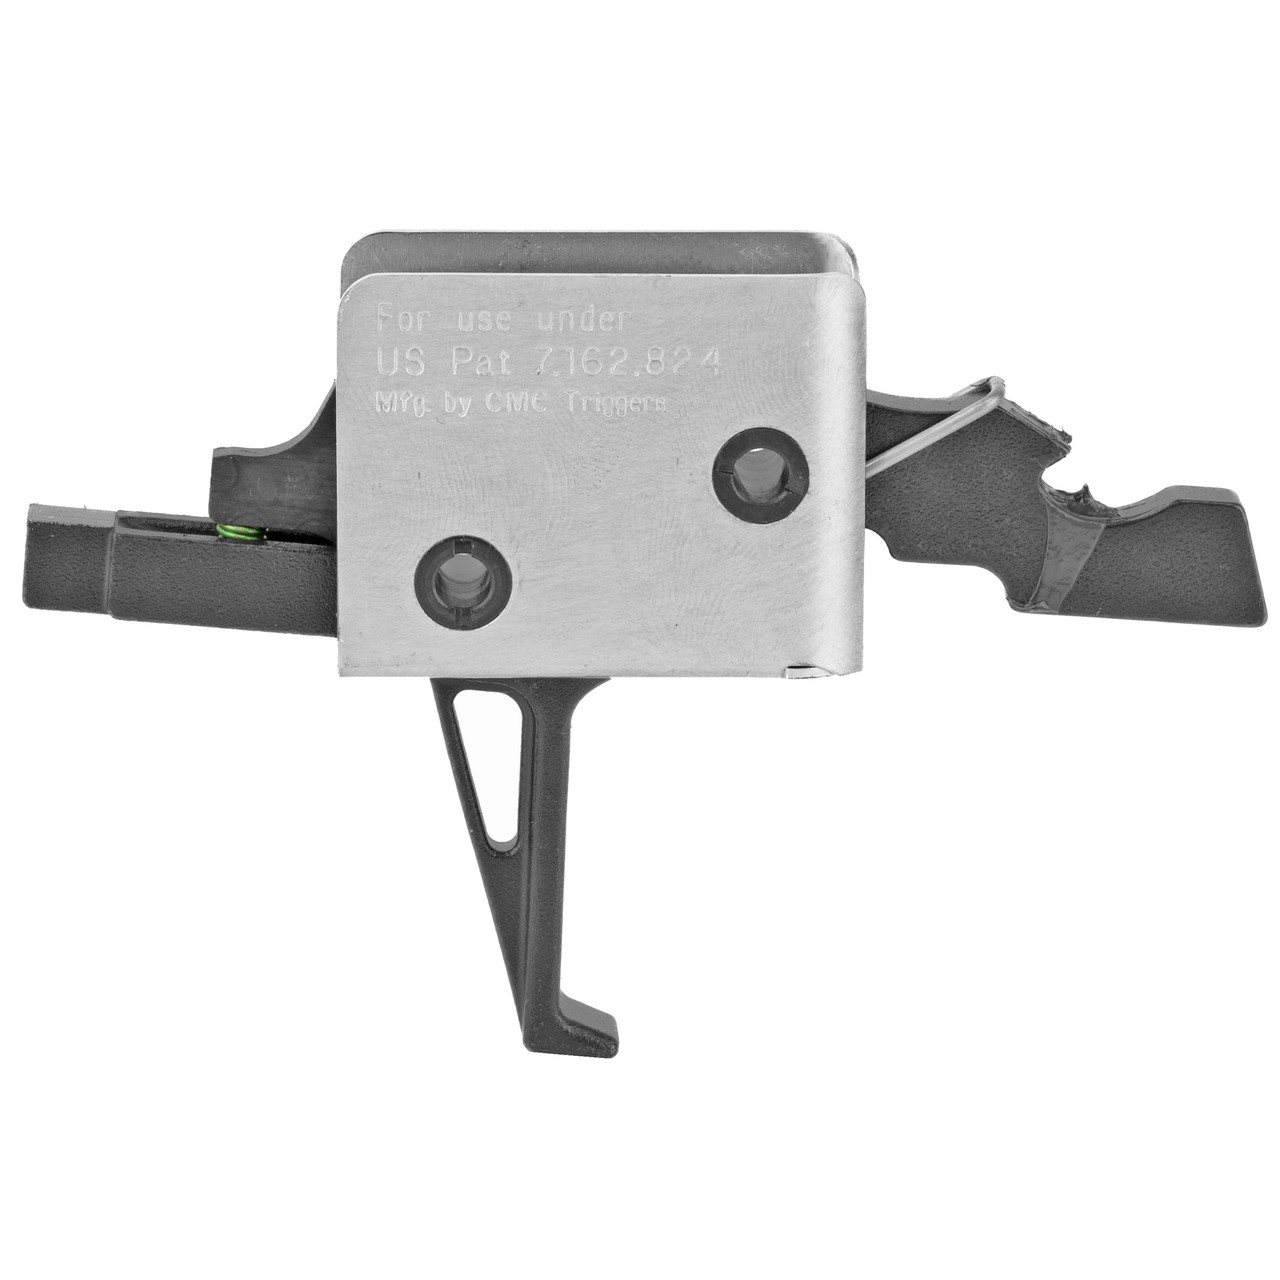 CMC Triggers Single Stage Drop-in Flat Trigger Assembly AR-15/10